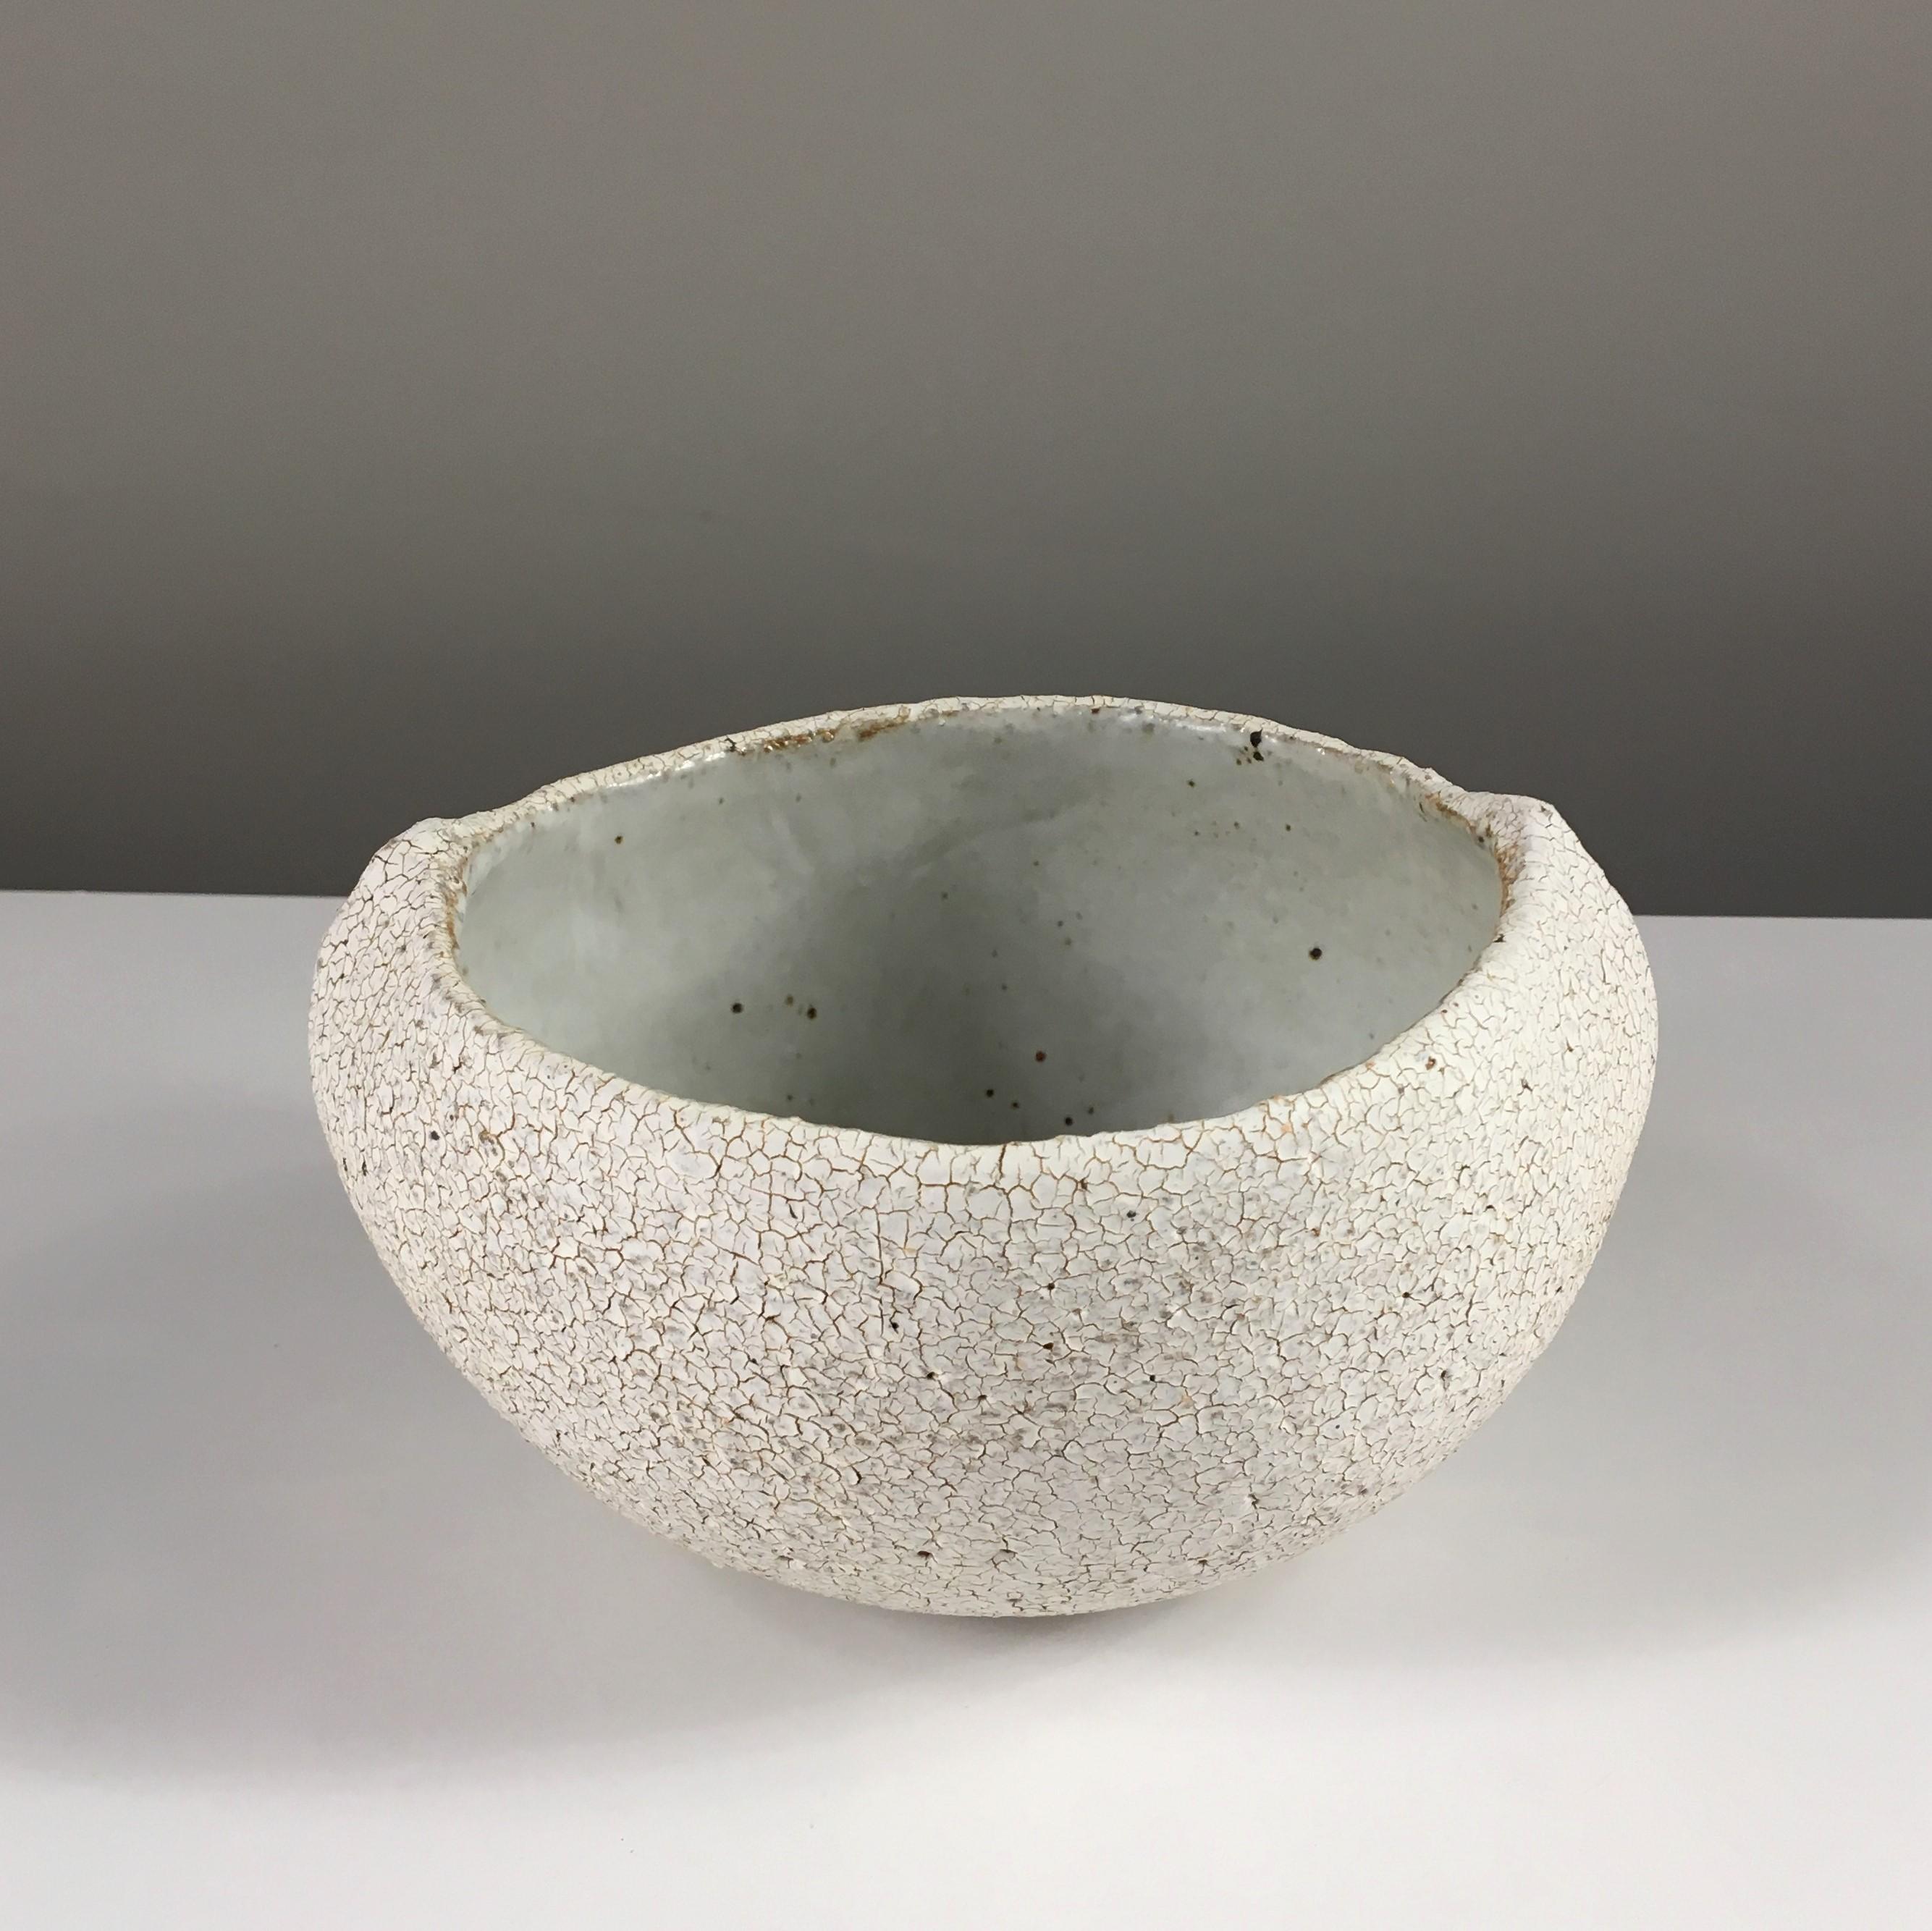 Ceramic Bowl with Inner Light Grey Glaze and Textured Outside by Yumiko Kuga. 
Dimensions: W 7